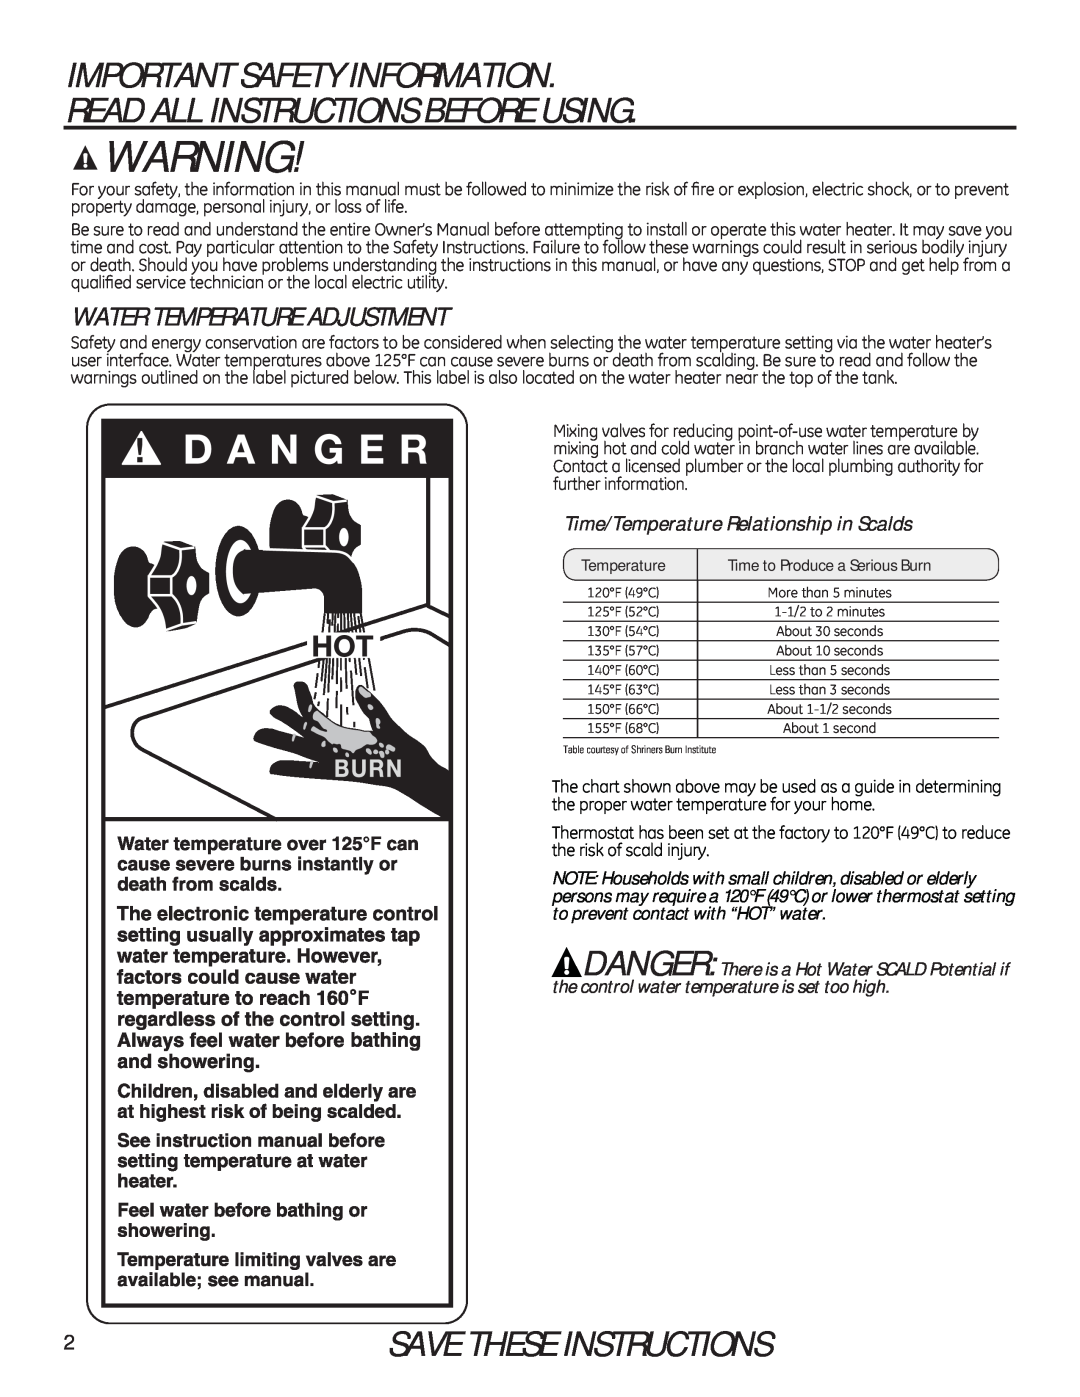 GE 49-50292 Important Safety Information Read All Instructions Before Using, Save These Instructions, Temperature 